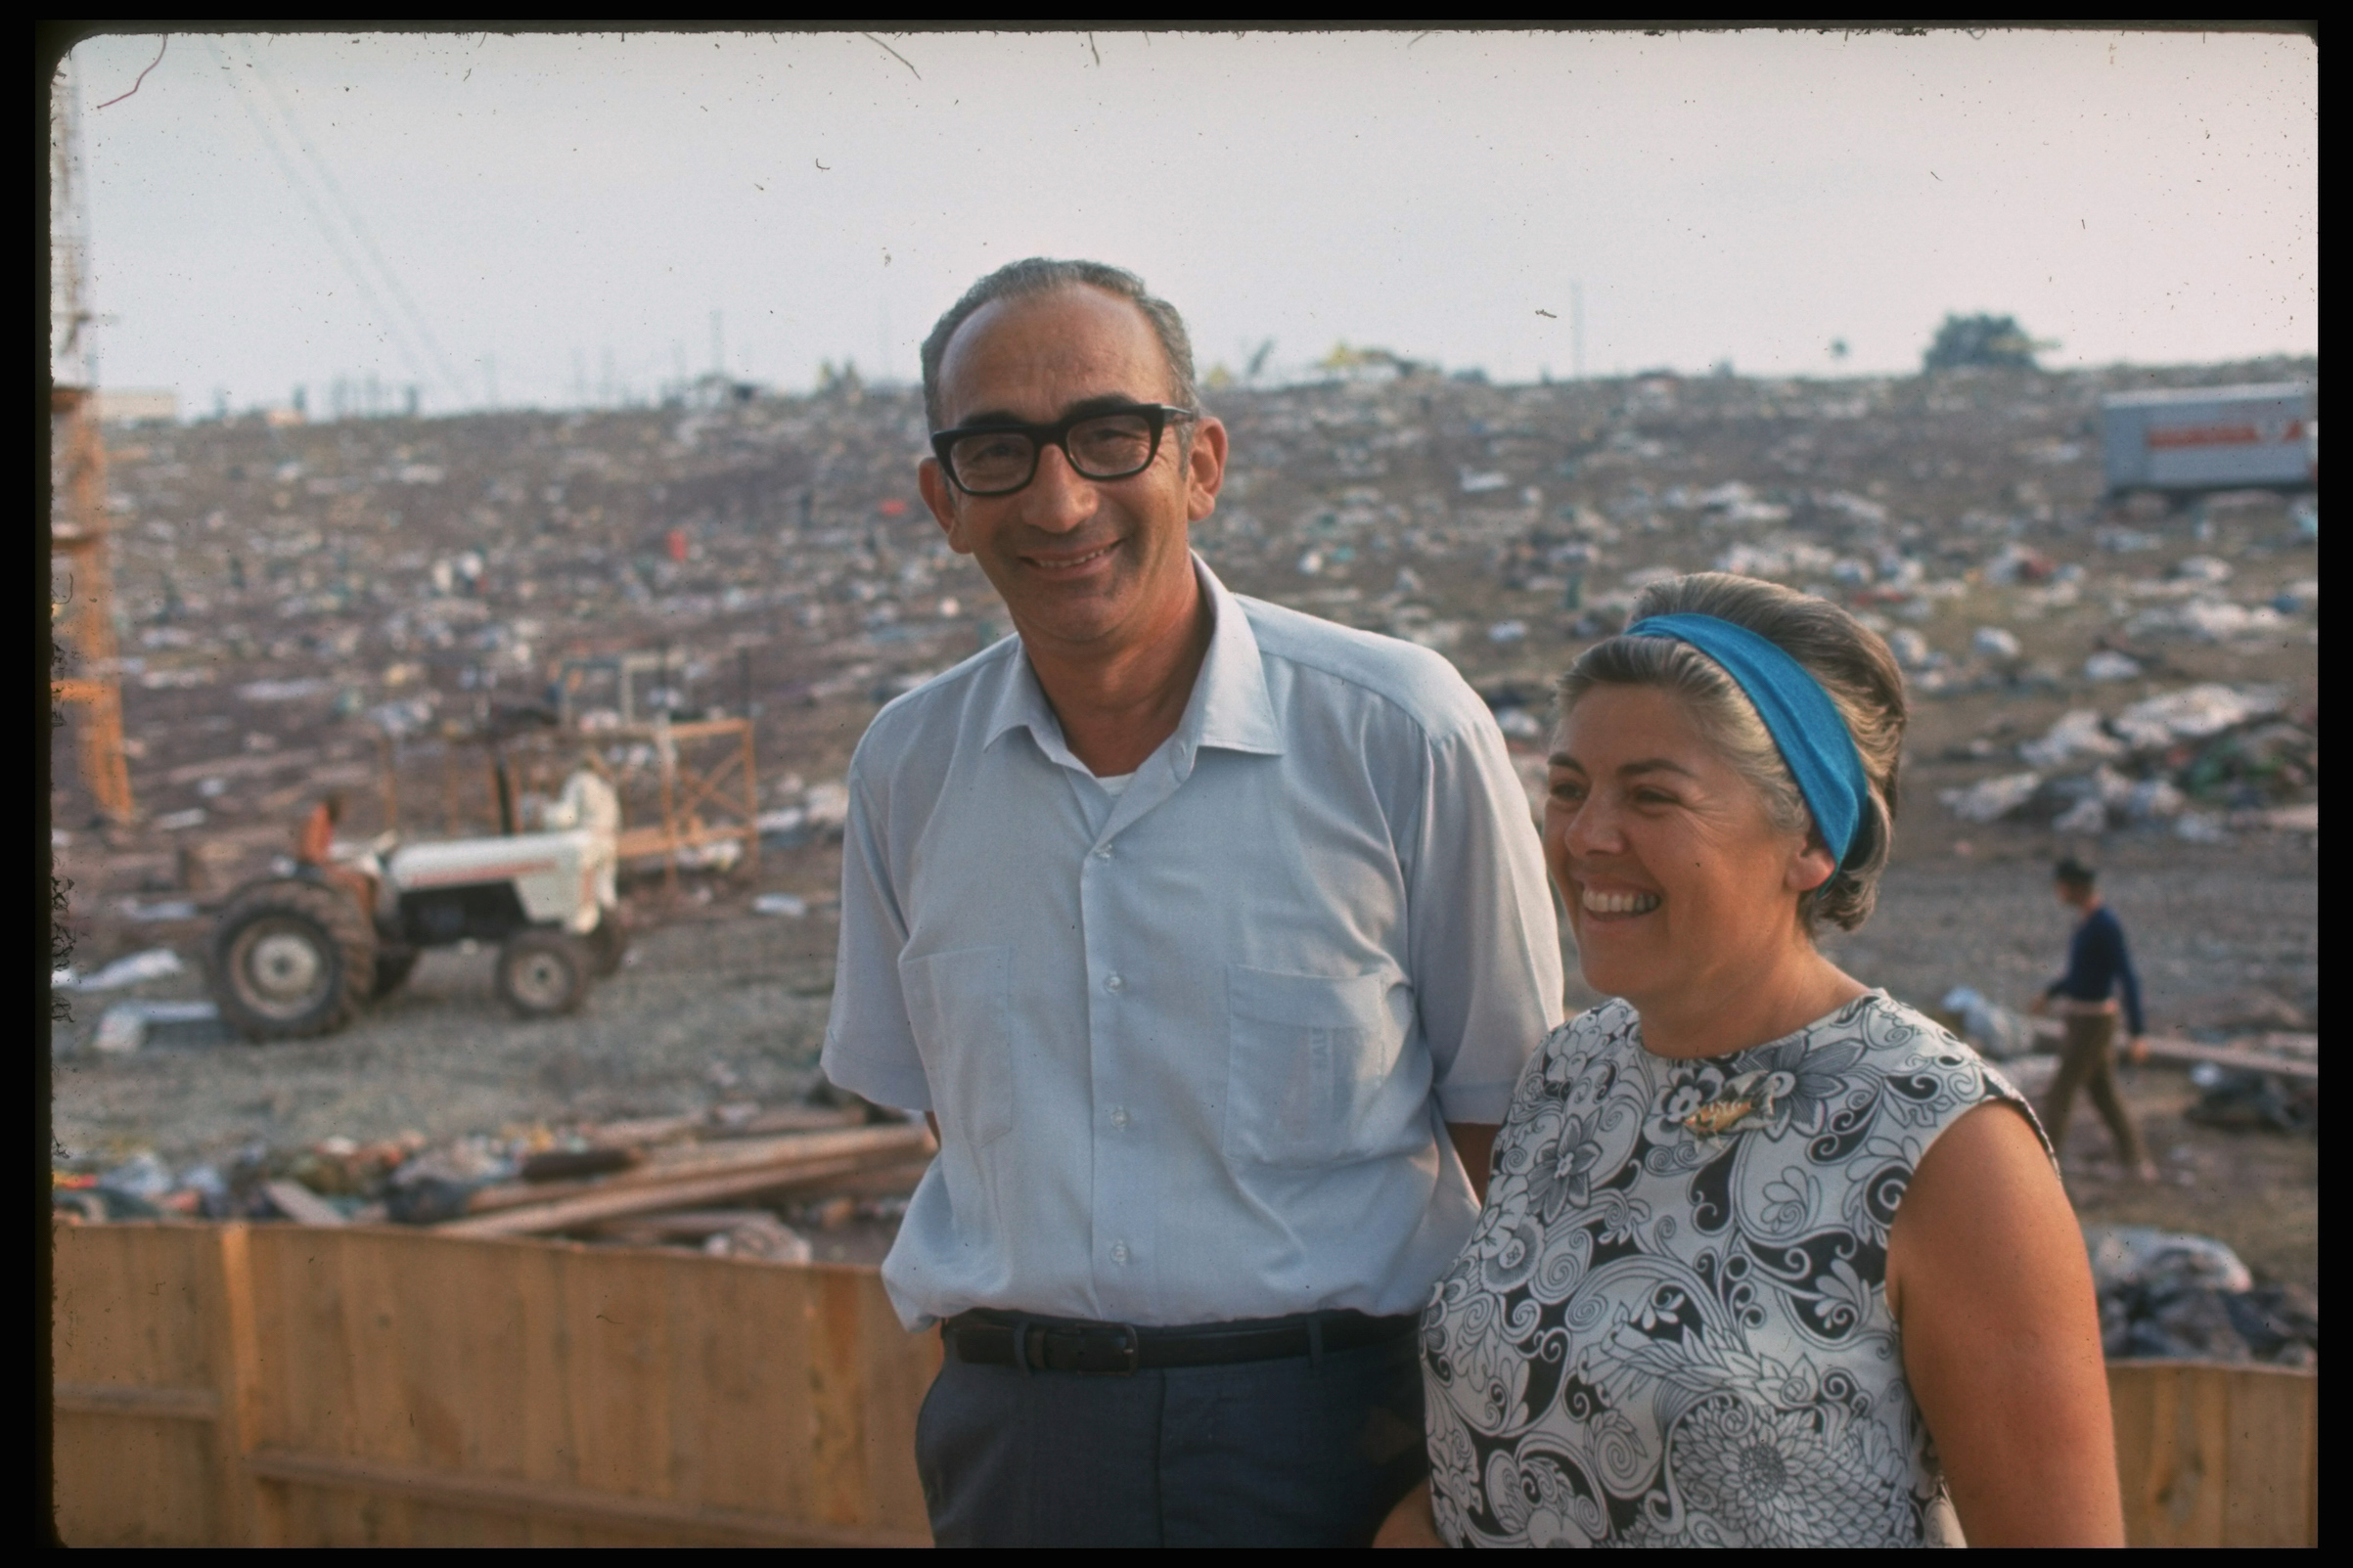 Max and Miriam Yasgur on their land after the Woodstock Music &amp; Art Fair. (Bill Eppridge—The LIFE Picture Collection via Getty Images)